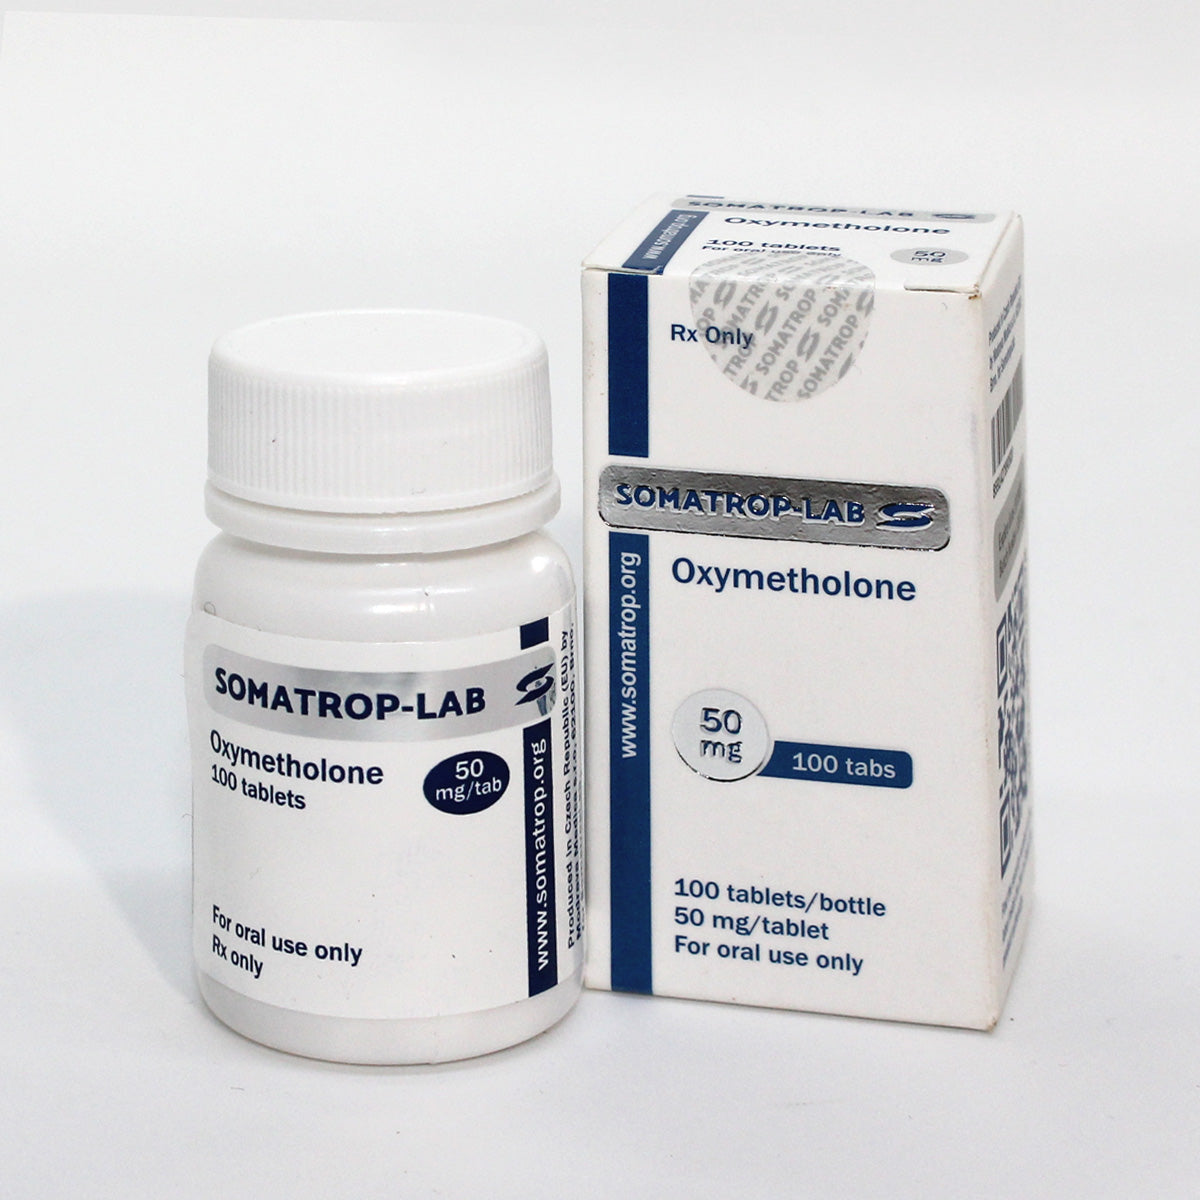 Somatrop-Lab Oxymetholone 100 tablets, 50mg each, front packaging.